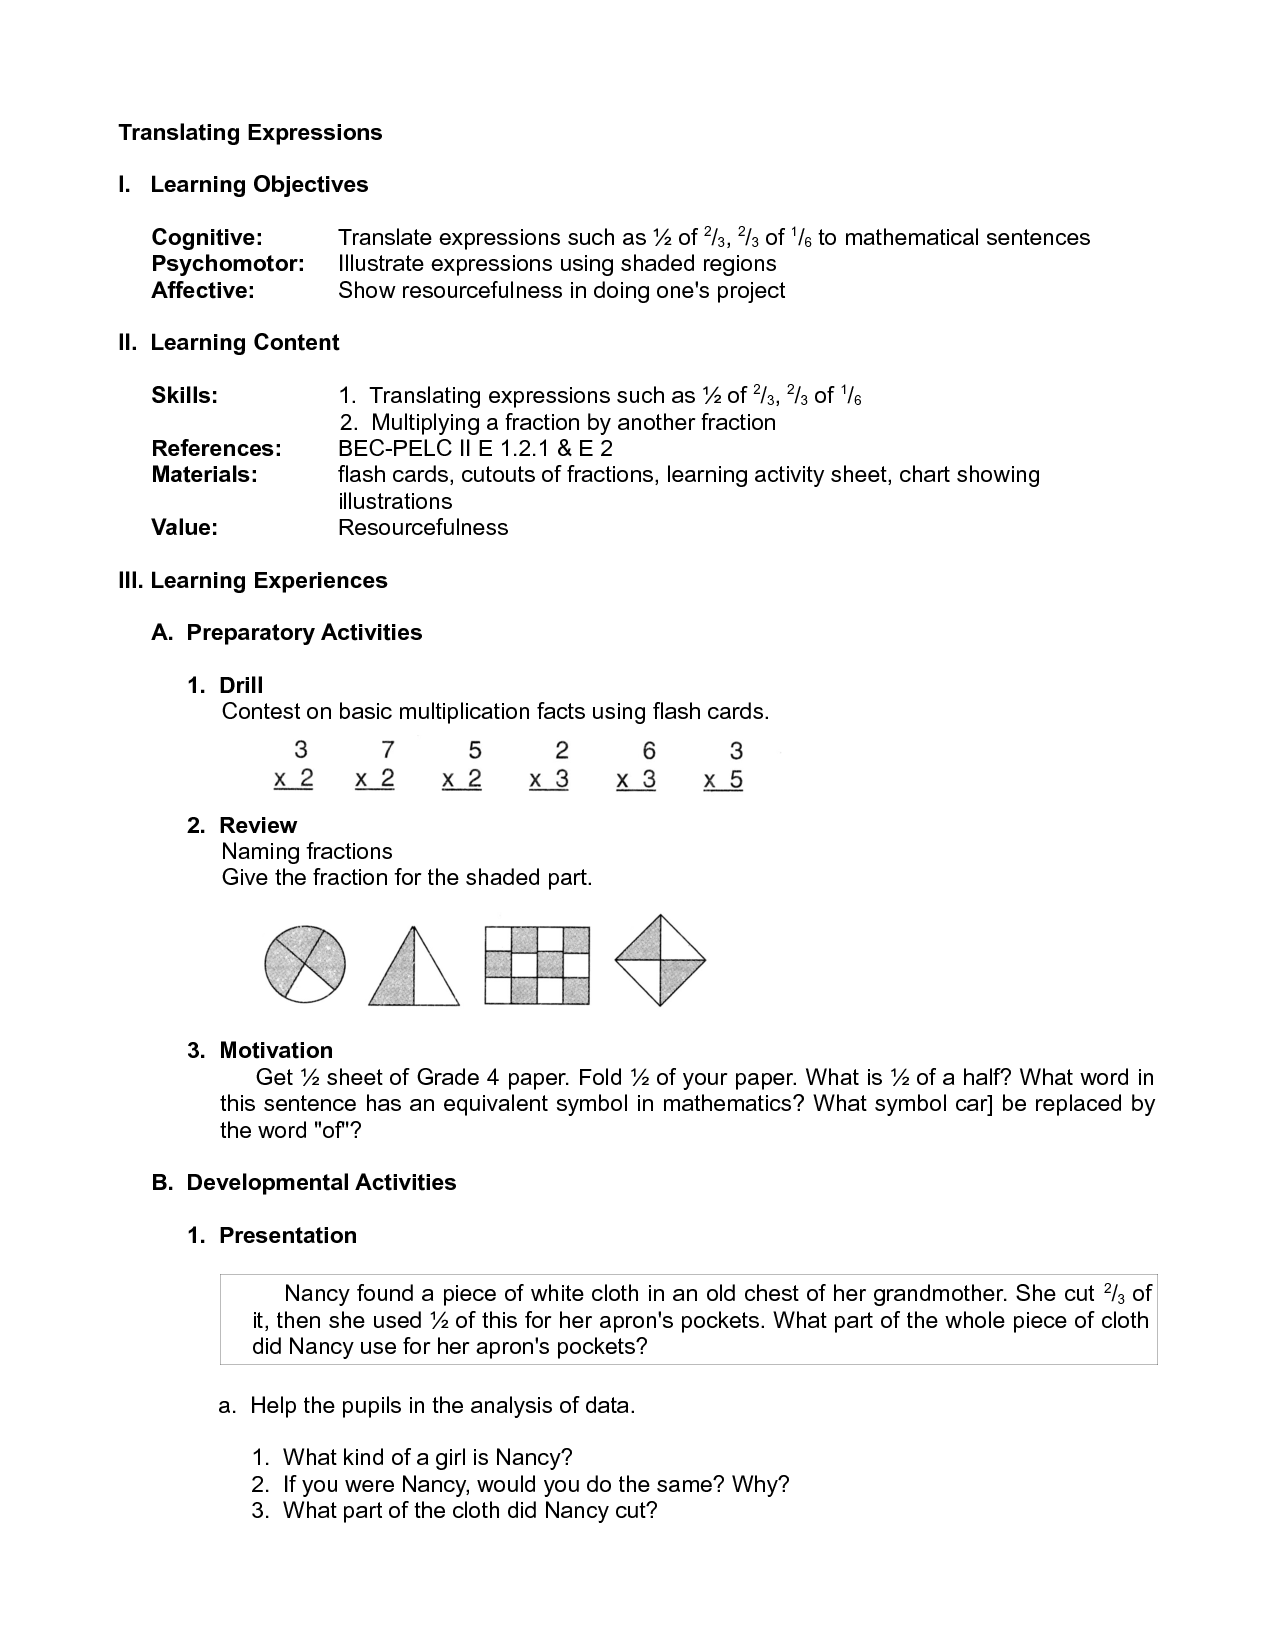 16-best-images-of-translating-verbal-expressions-worksheets-translating-algebraic-expressions